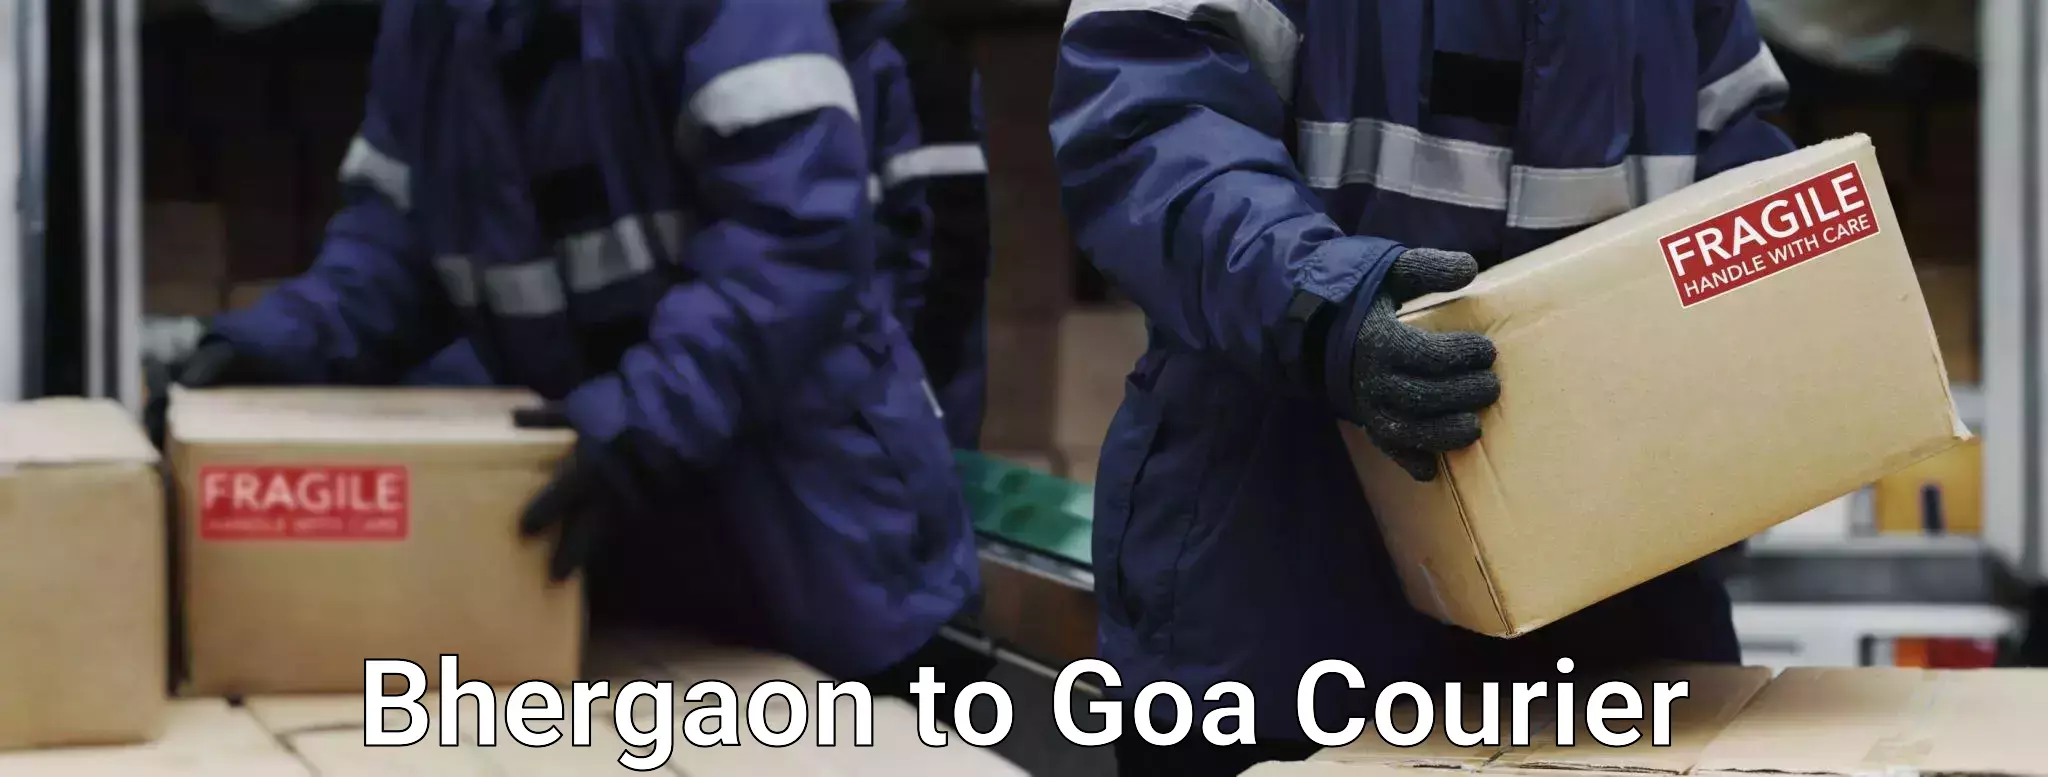 Luggage delivery operations Bhergaon to Goa